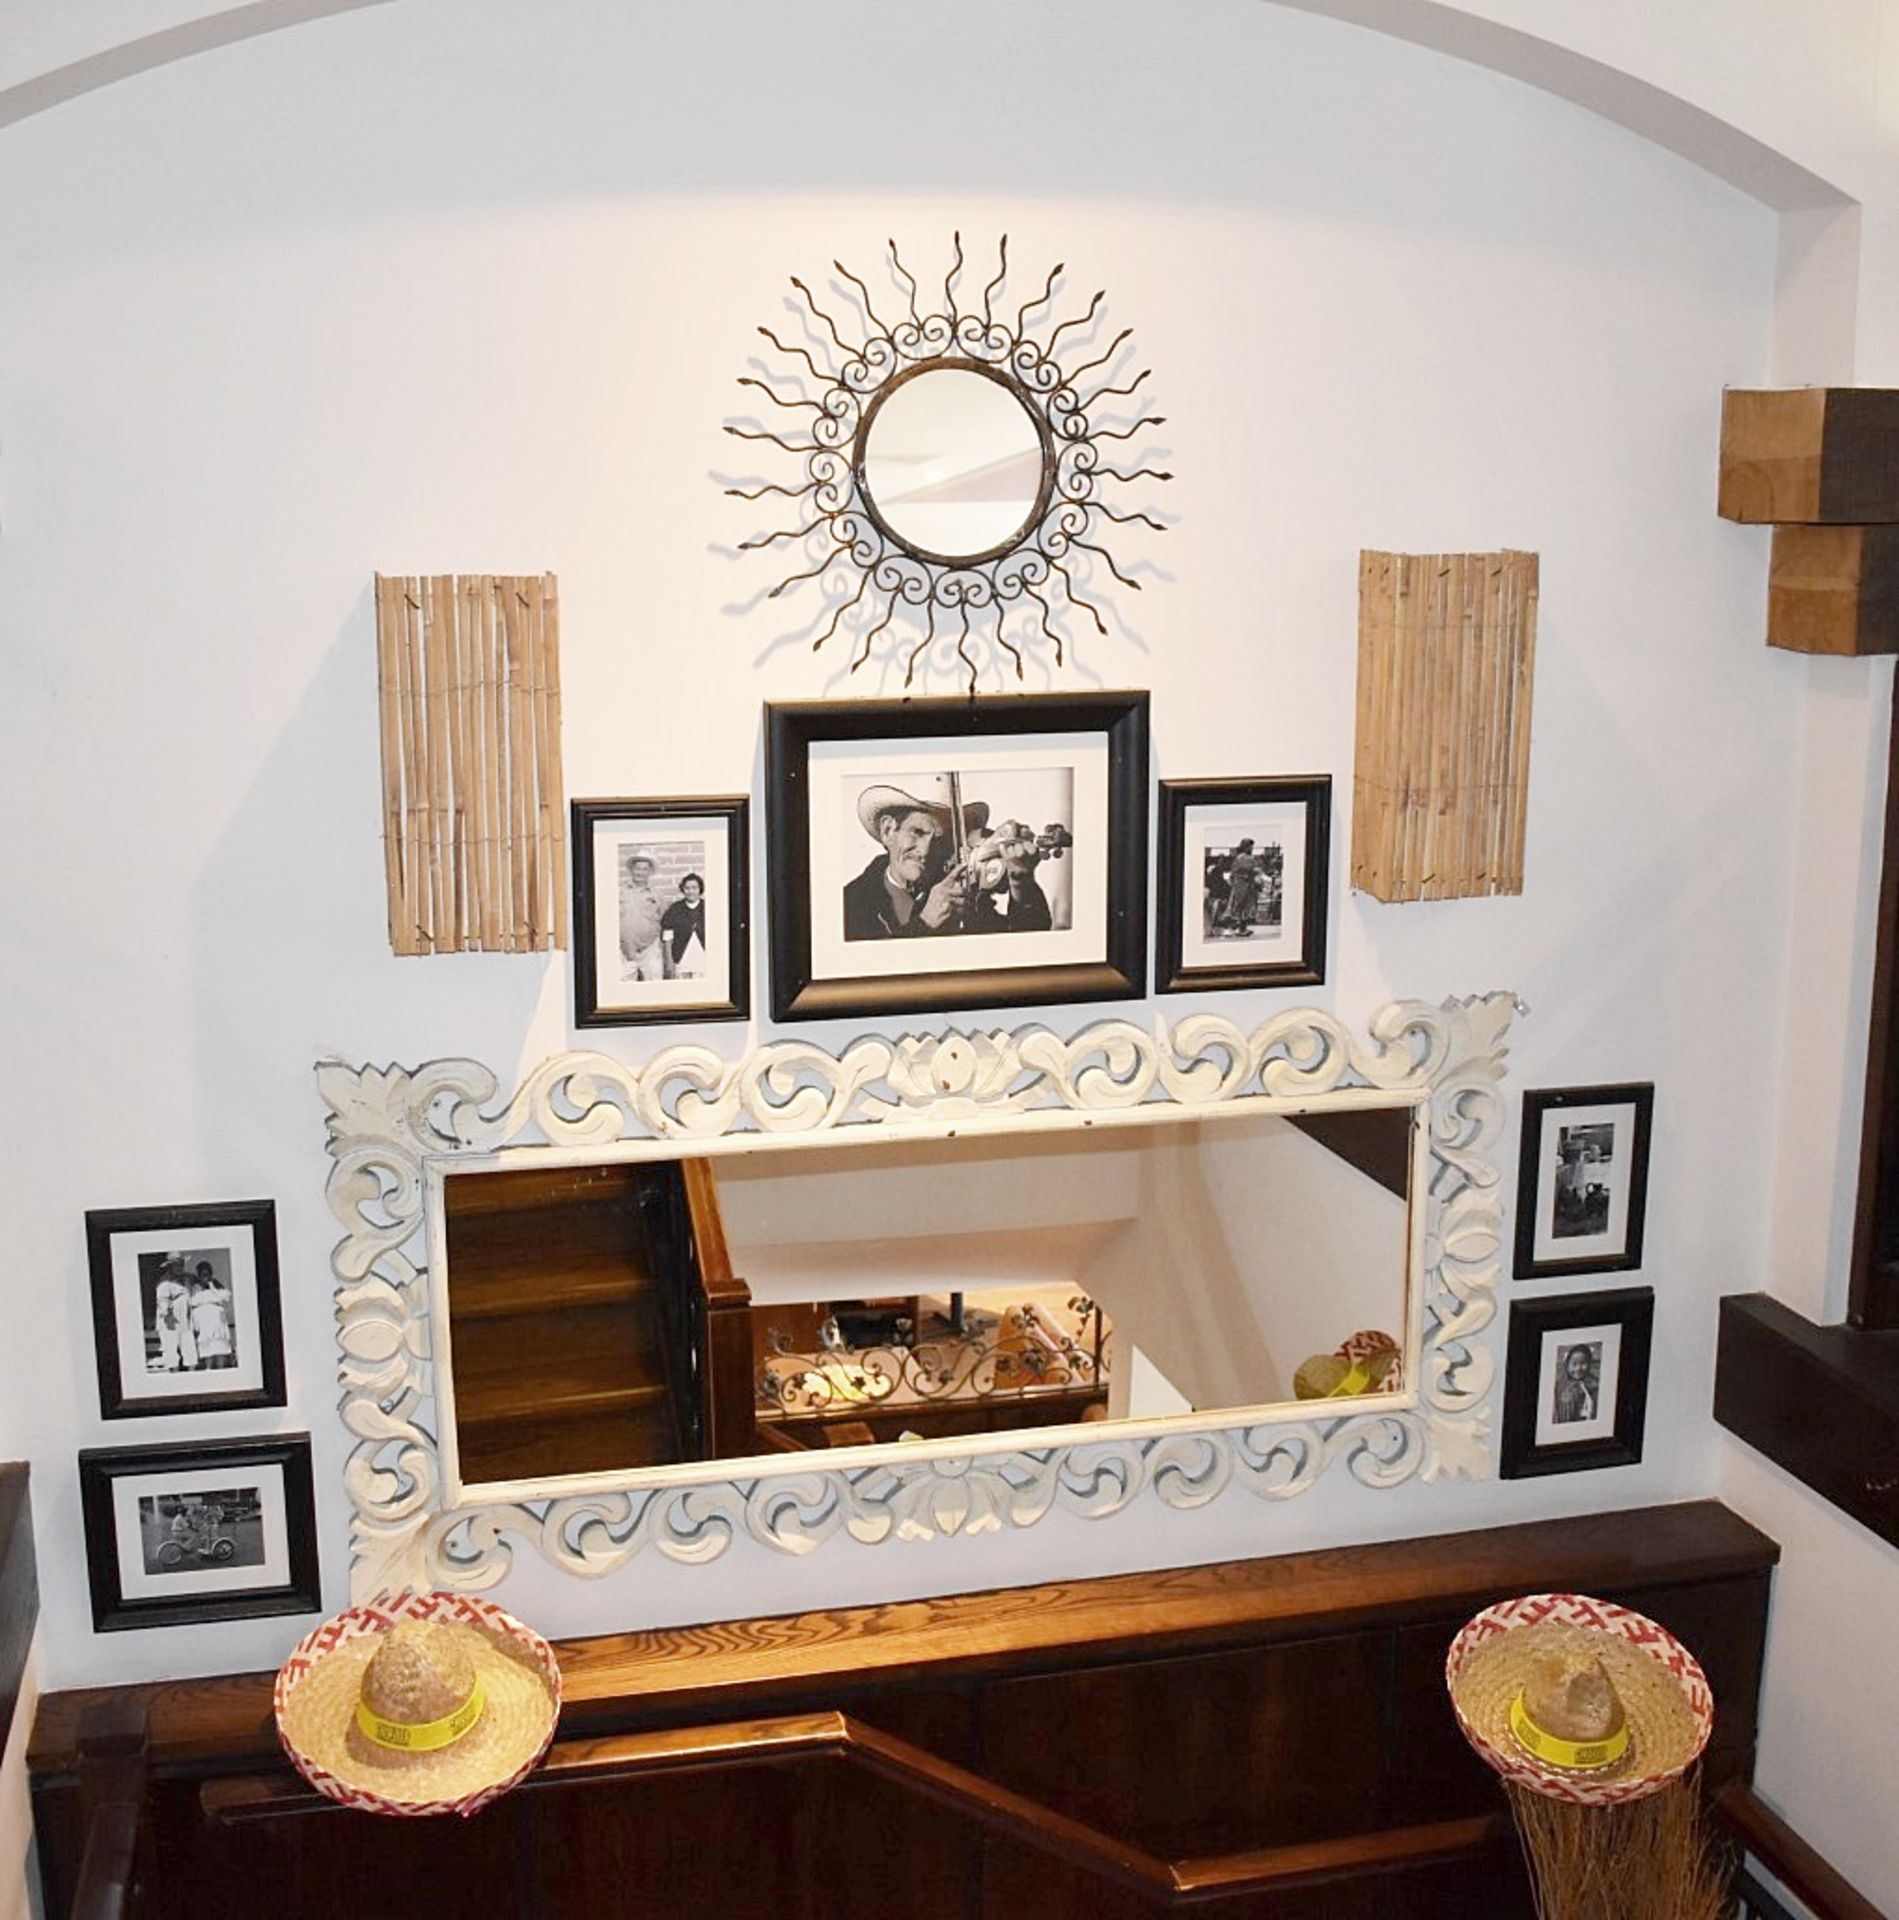 3 x Large Rectangular Wall Mirrors With Ornate Carved Wooden Frames In A Rustic White Wash - Image 5 of 5